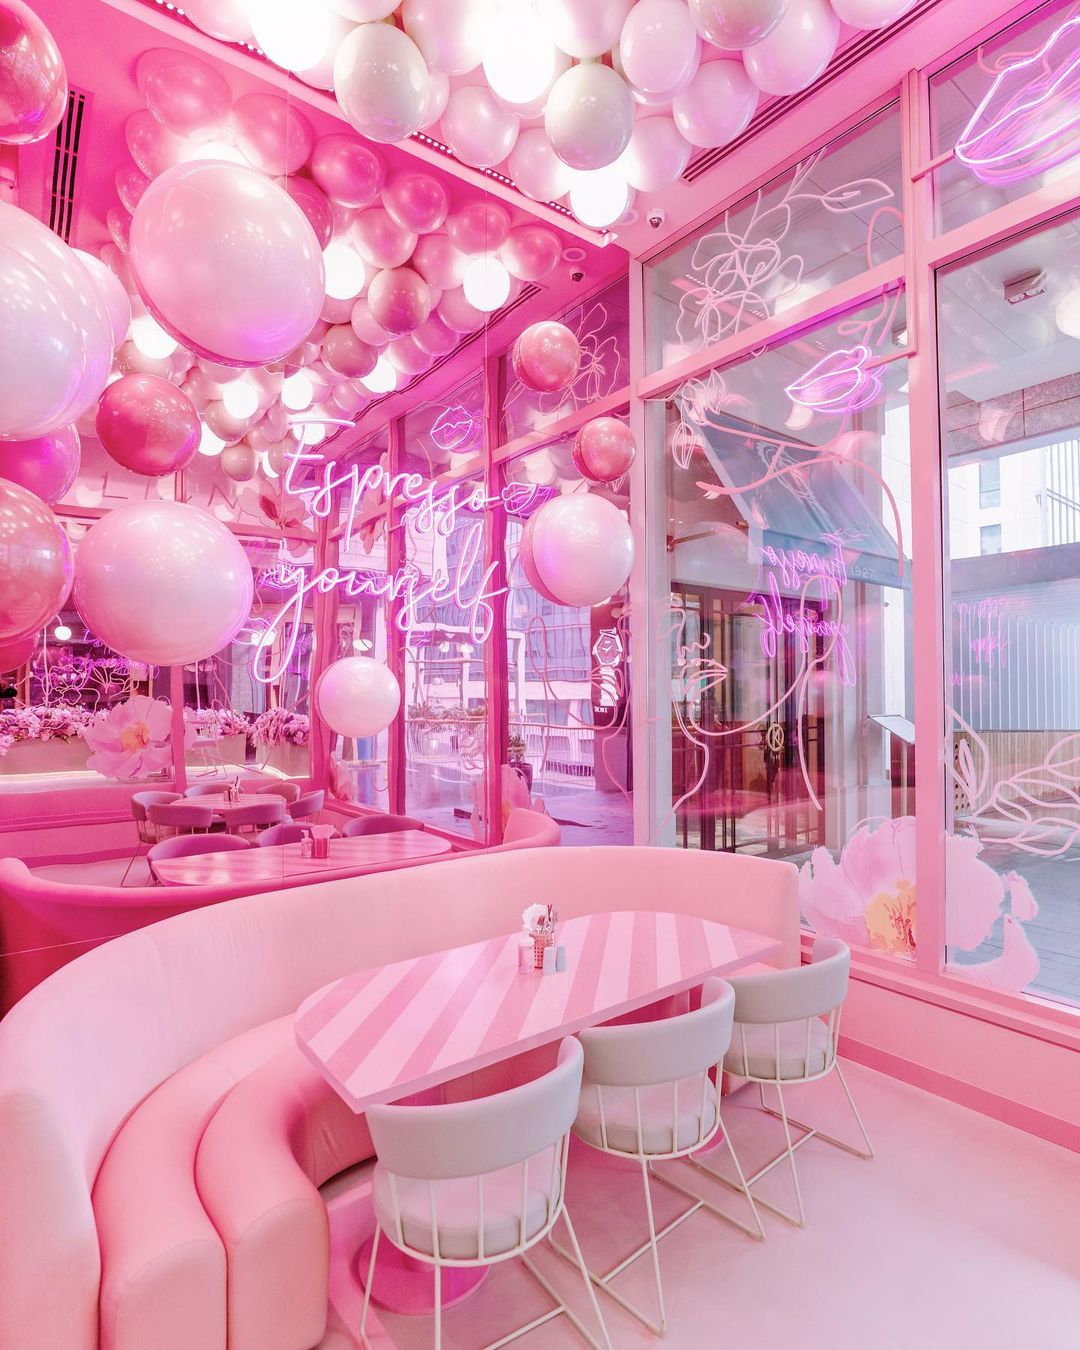 All-pink Instagram-worthy cake cafe EL&N coming to Manchester